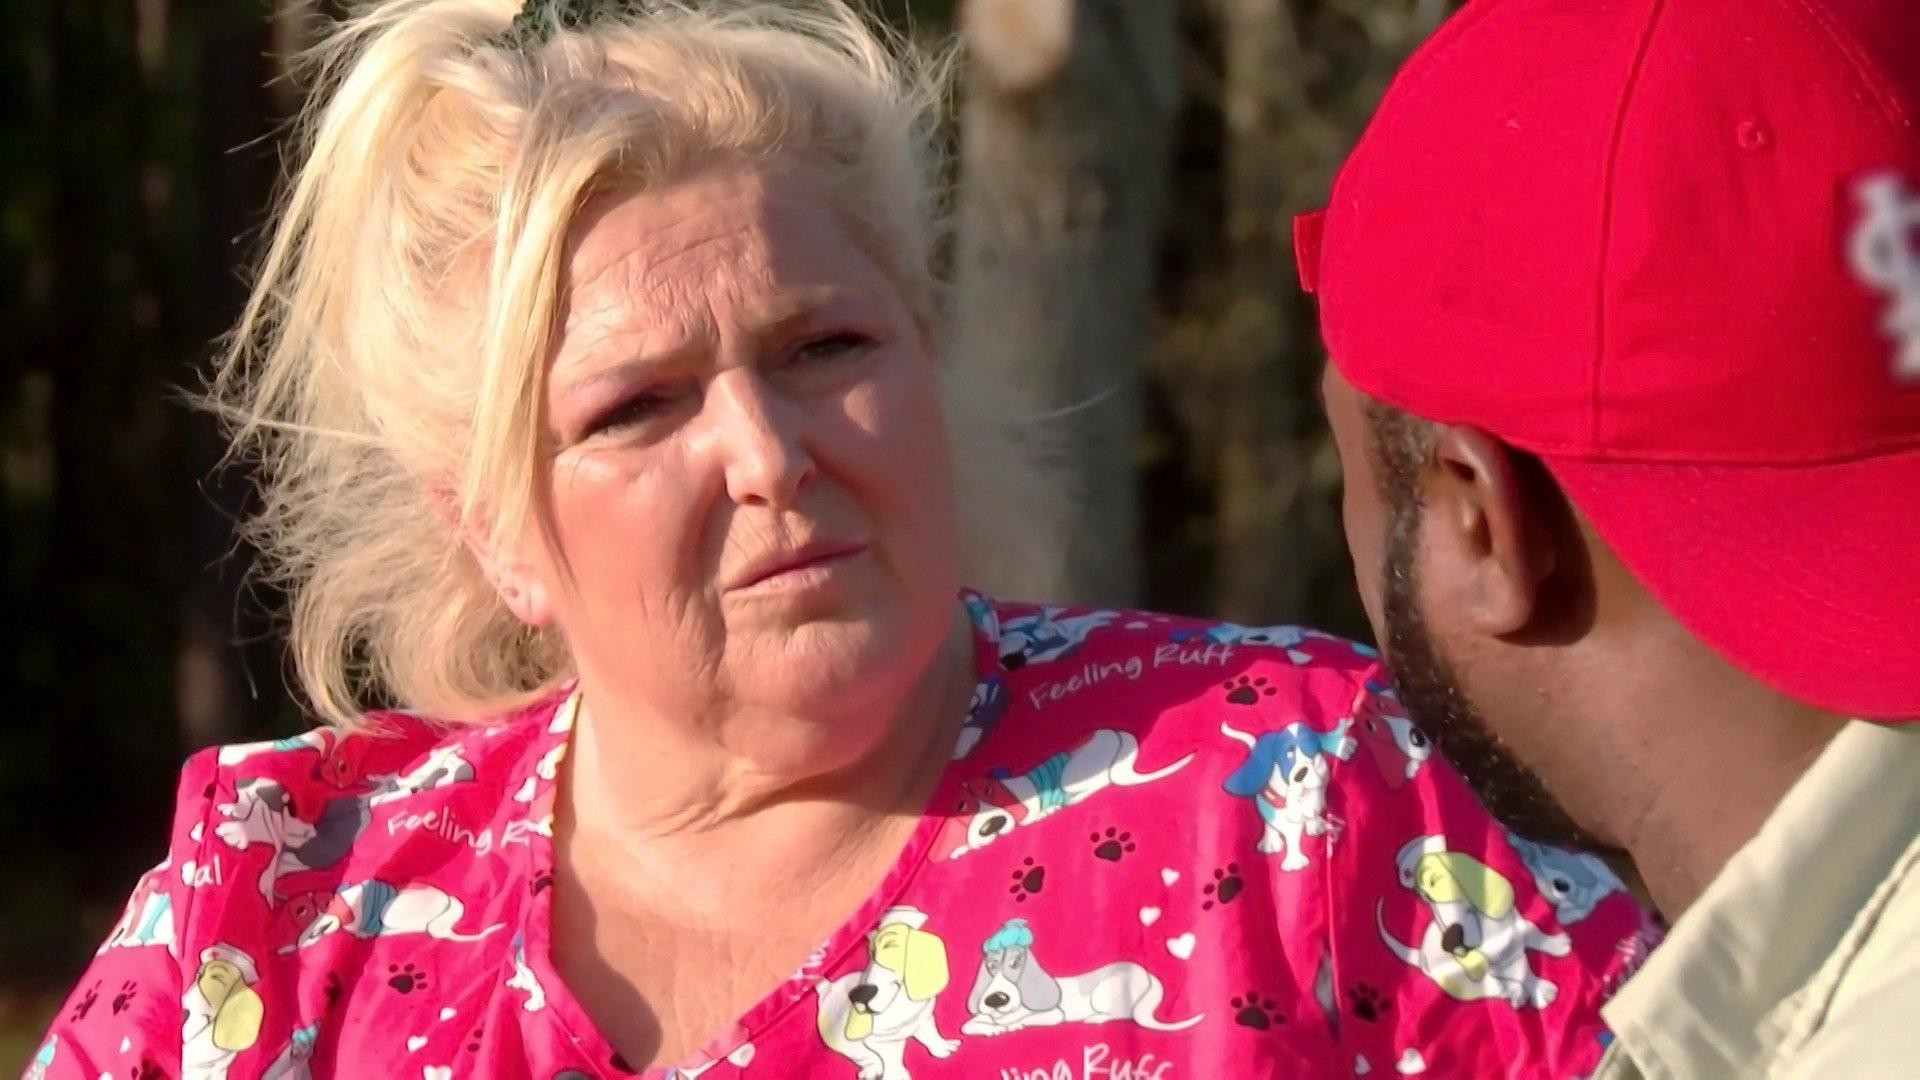 90 Day Fiancé: Before the 90 Days: Little Lies